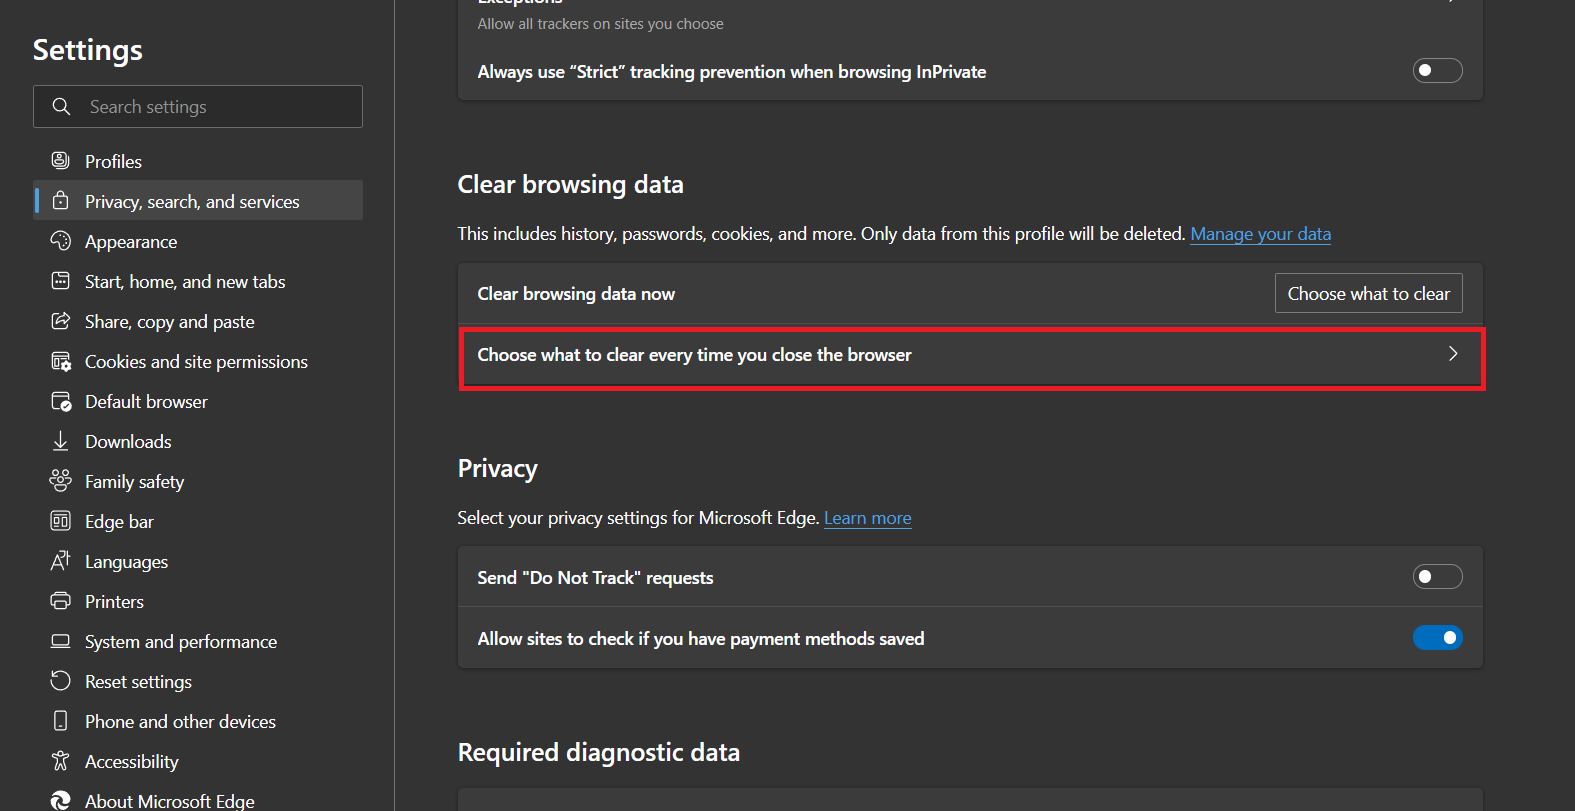 Under Clear Browsing Data, Click on Choose what to clear every time you close the browser.